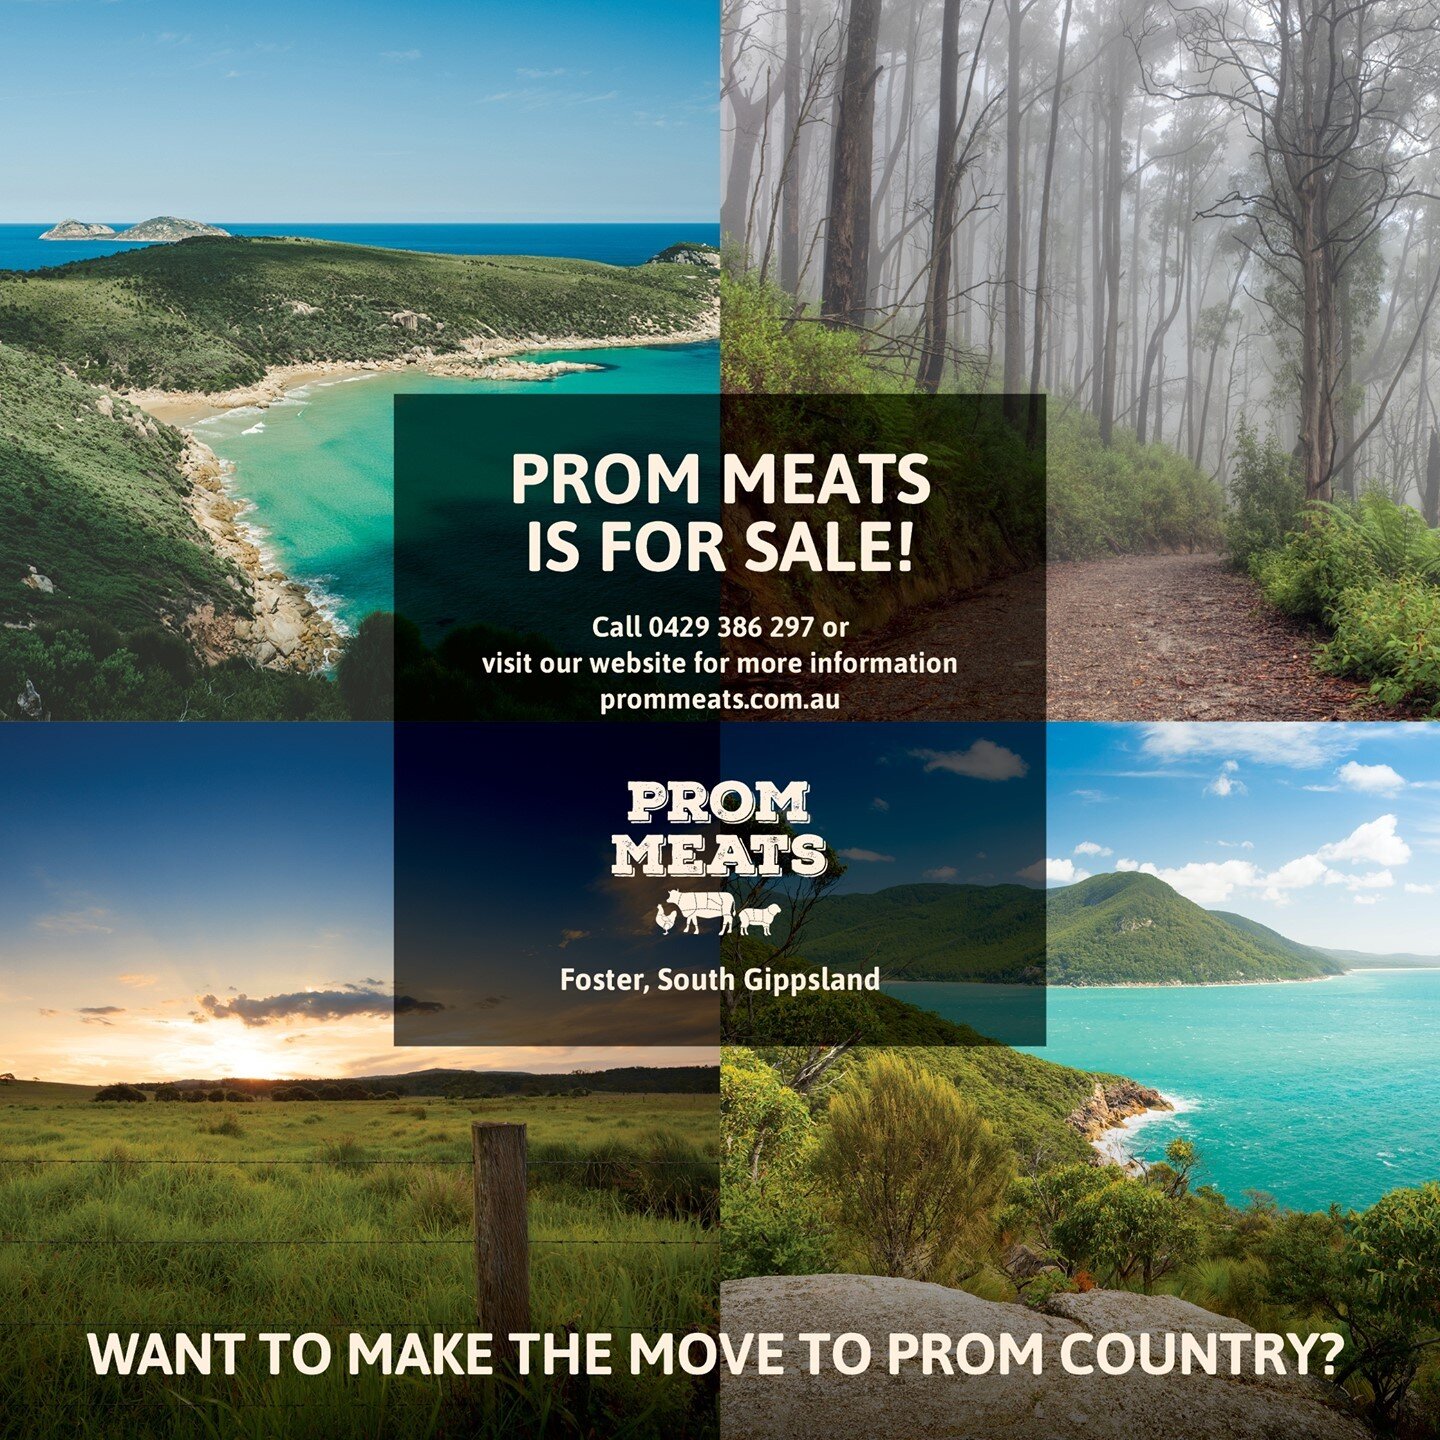 ☀️ Want to live &amp; work in Prom Country? Make the sea change! Foster is located a short drive to iconic Wilsons Promontory! ⁠
⁠
John &amp; Mohya are selling their business after many decades of great success in Foster Main Street! ☀️🌳 Prom Meats 